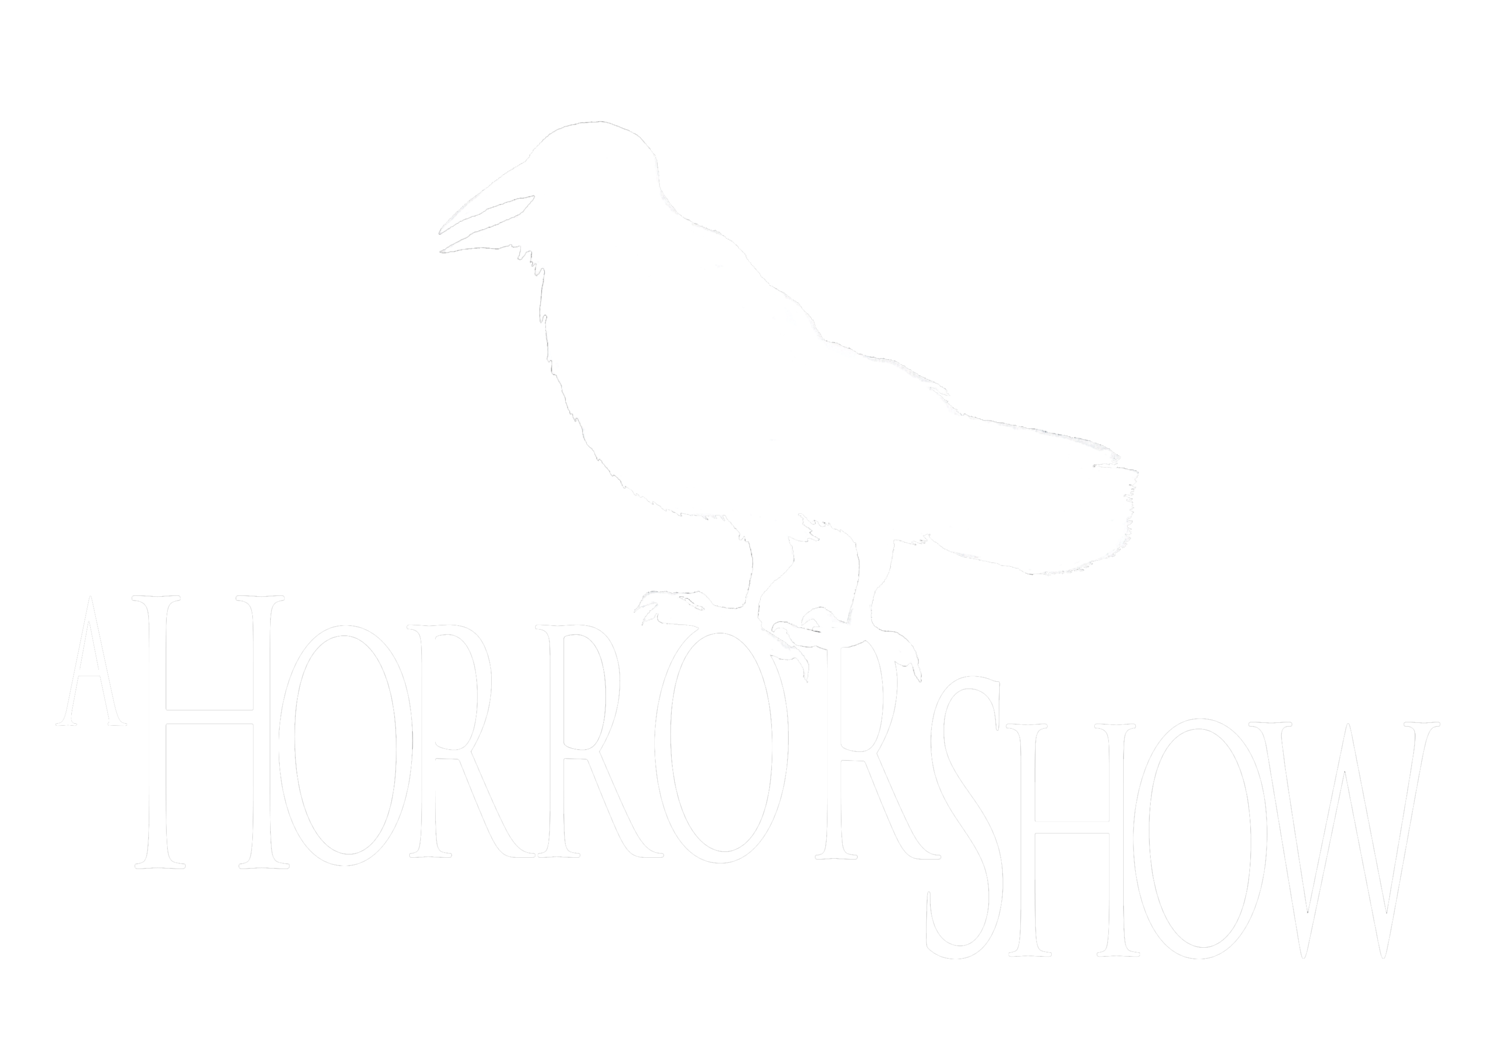 A Horrorshow